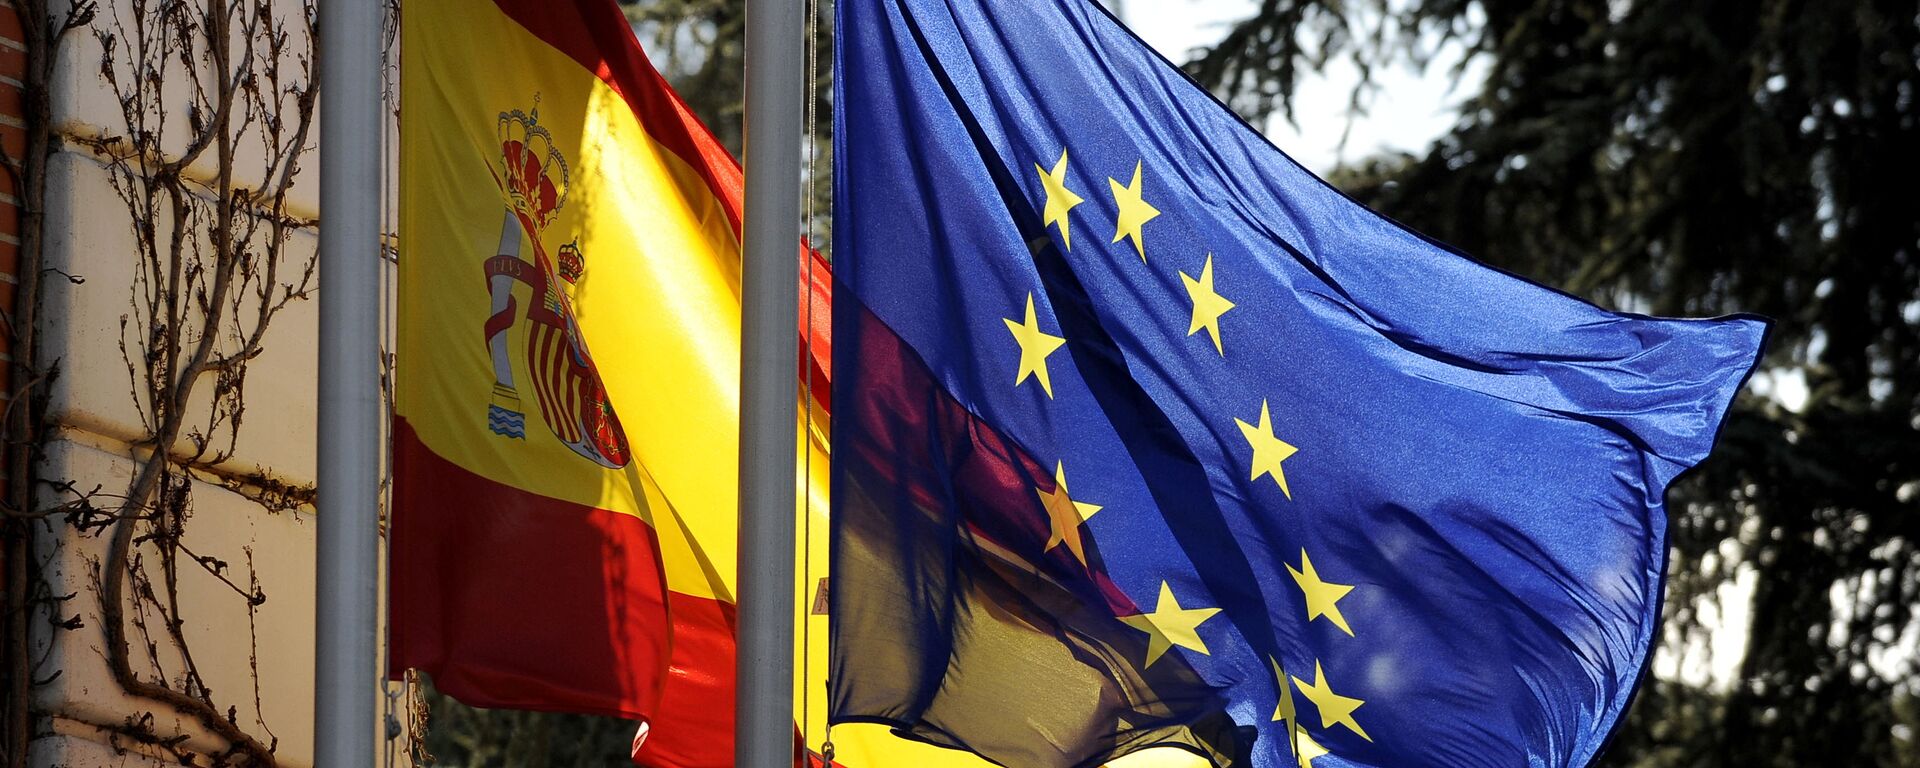 The Spanish flag and the European Union flag fly in front of the Moncloa palace in Madrid on January 8, 2010 - Sputnik Mundo, 1920, 16.06.2021